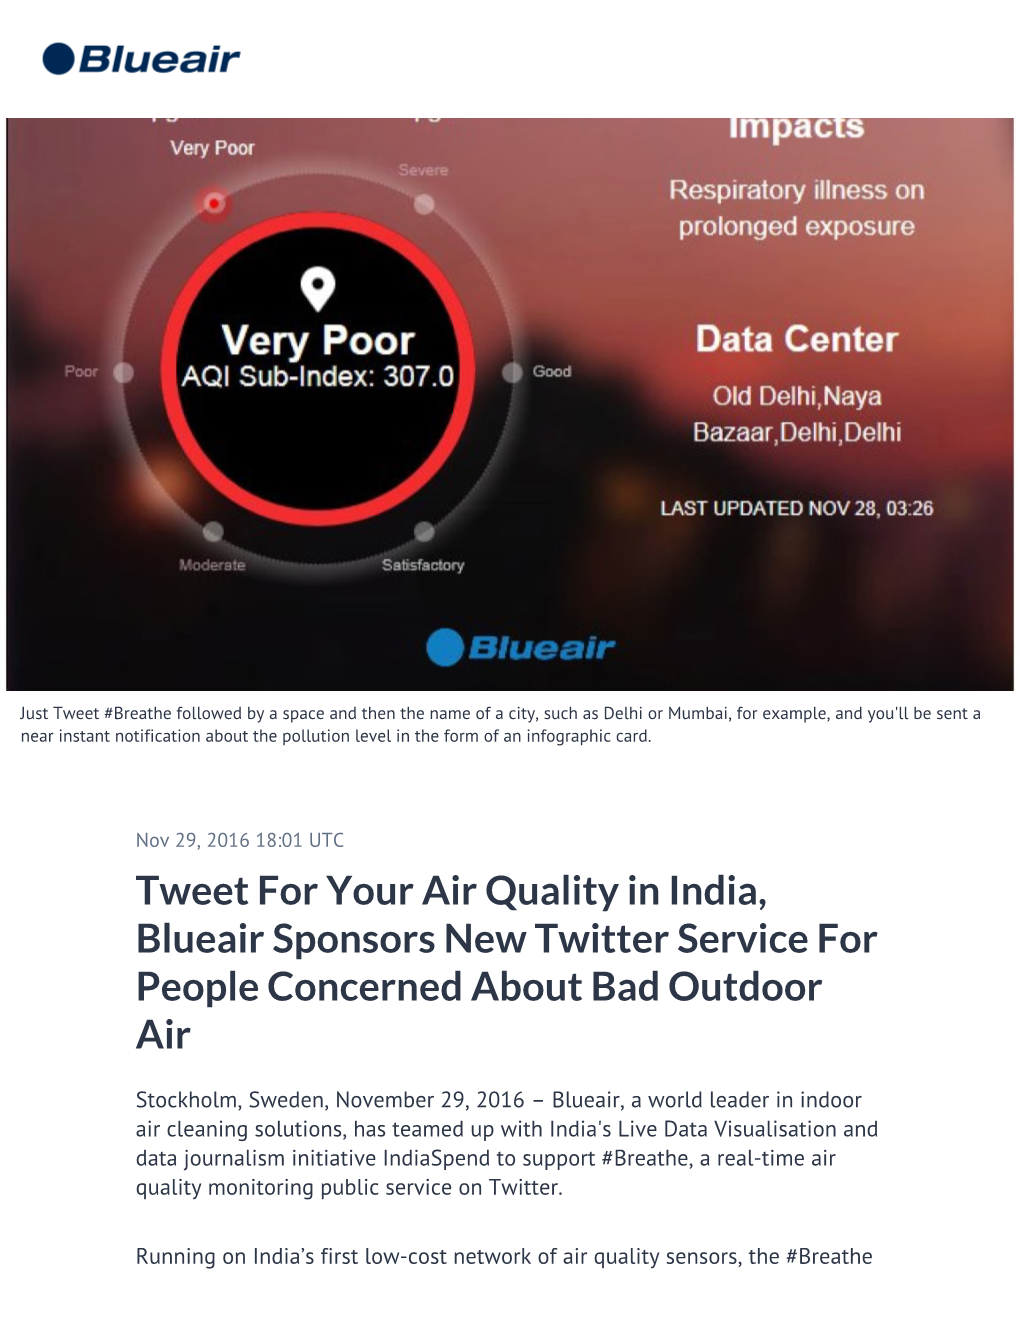 Tweet for Your Air Quality in India, Blueair Sponsors New Twitter Service for People Concerned About Bad Outdoor Air